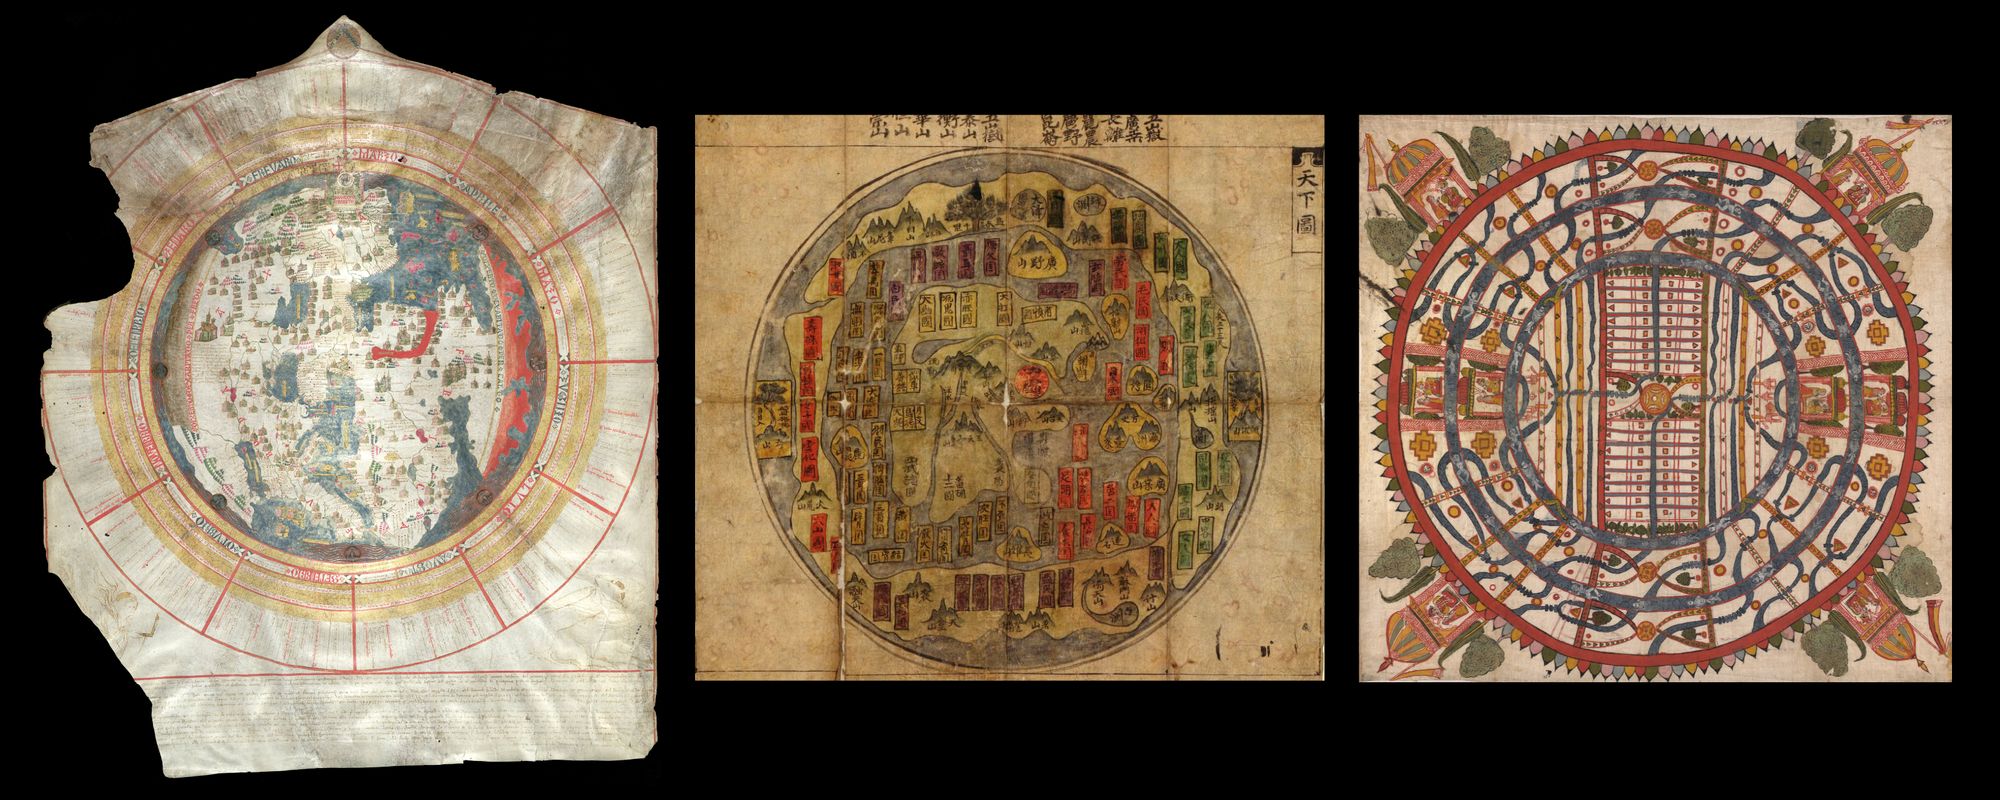 Left: A round map showing a lot of details. Cities and villages are illustrated with buildings. The map is framed by a calendar whose months are arranged radially around the card.  Middle: A circular map illustrated with mountains and trees. Right: A colorful circular map with a rectangular form in the middle and two ring-shaped forms on the outside. The map does not represent any geographical forms but is rather abstract.